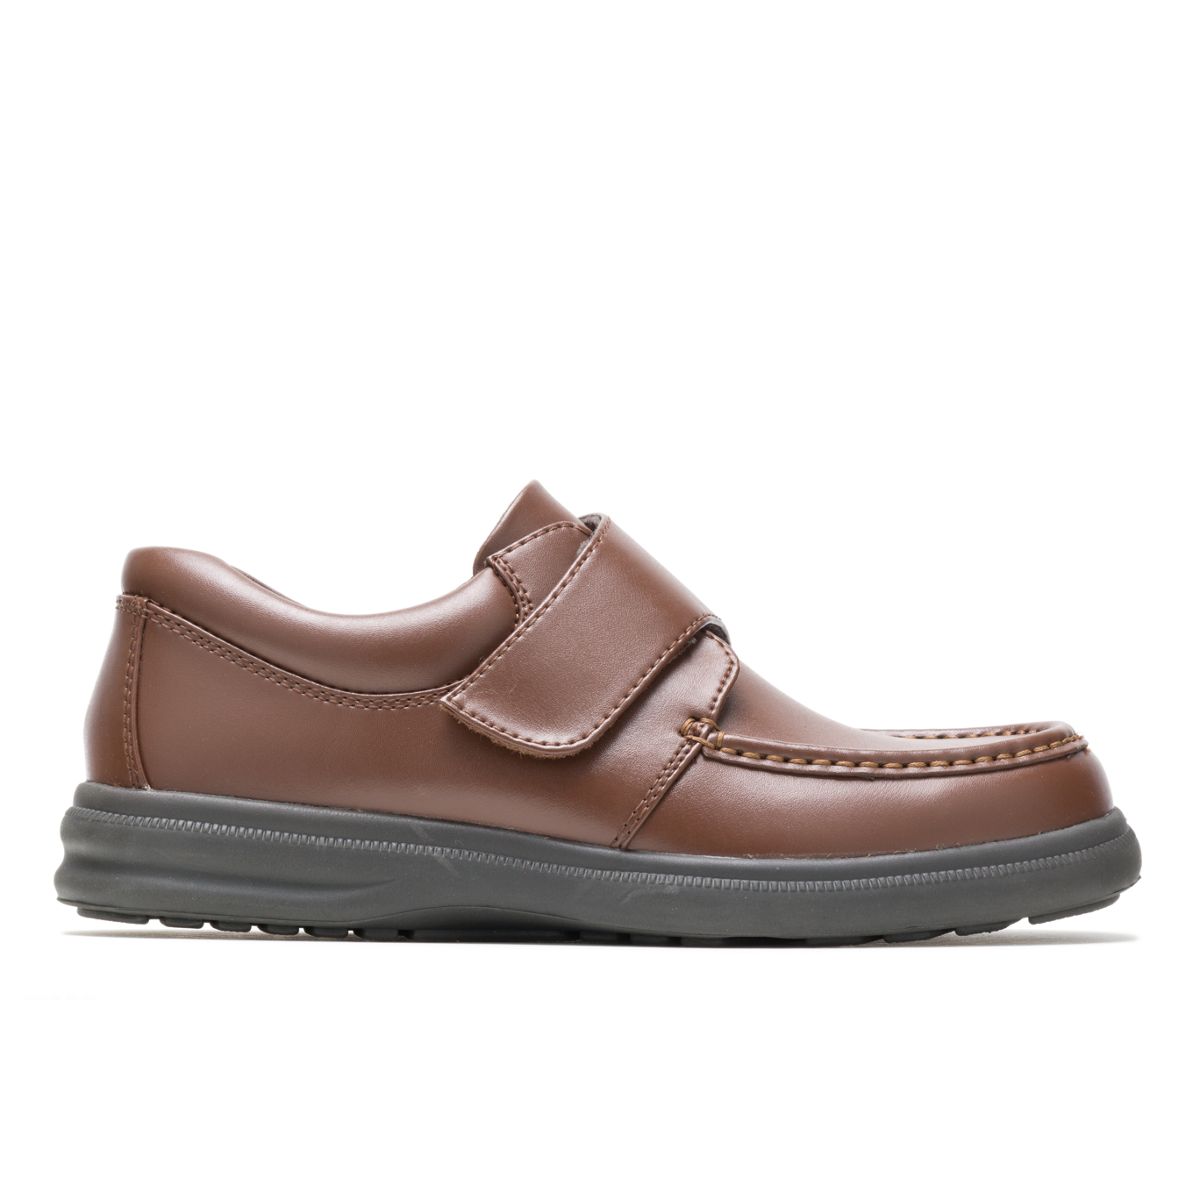 hush puppies shoes for boys